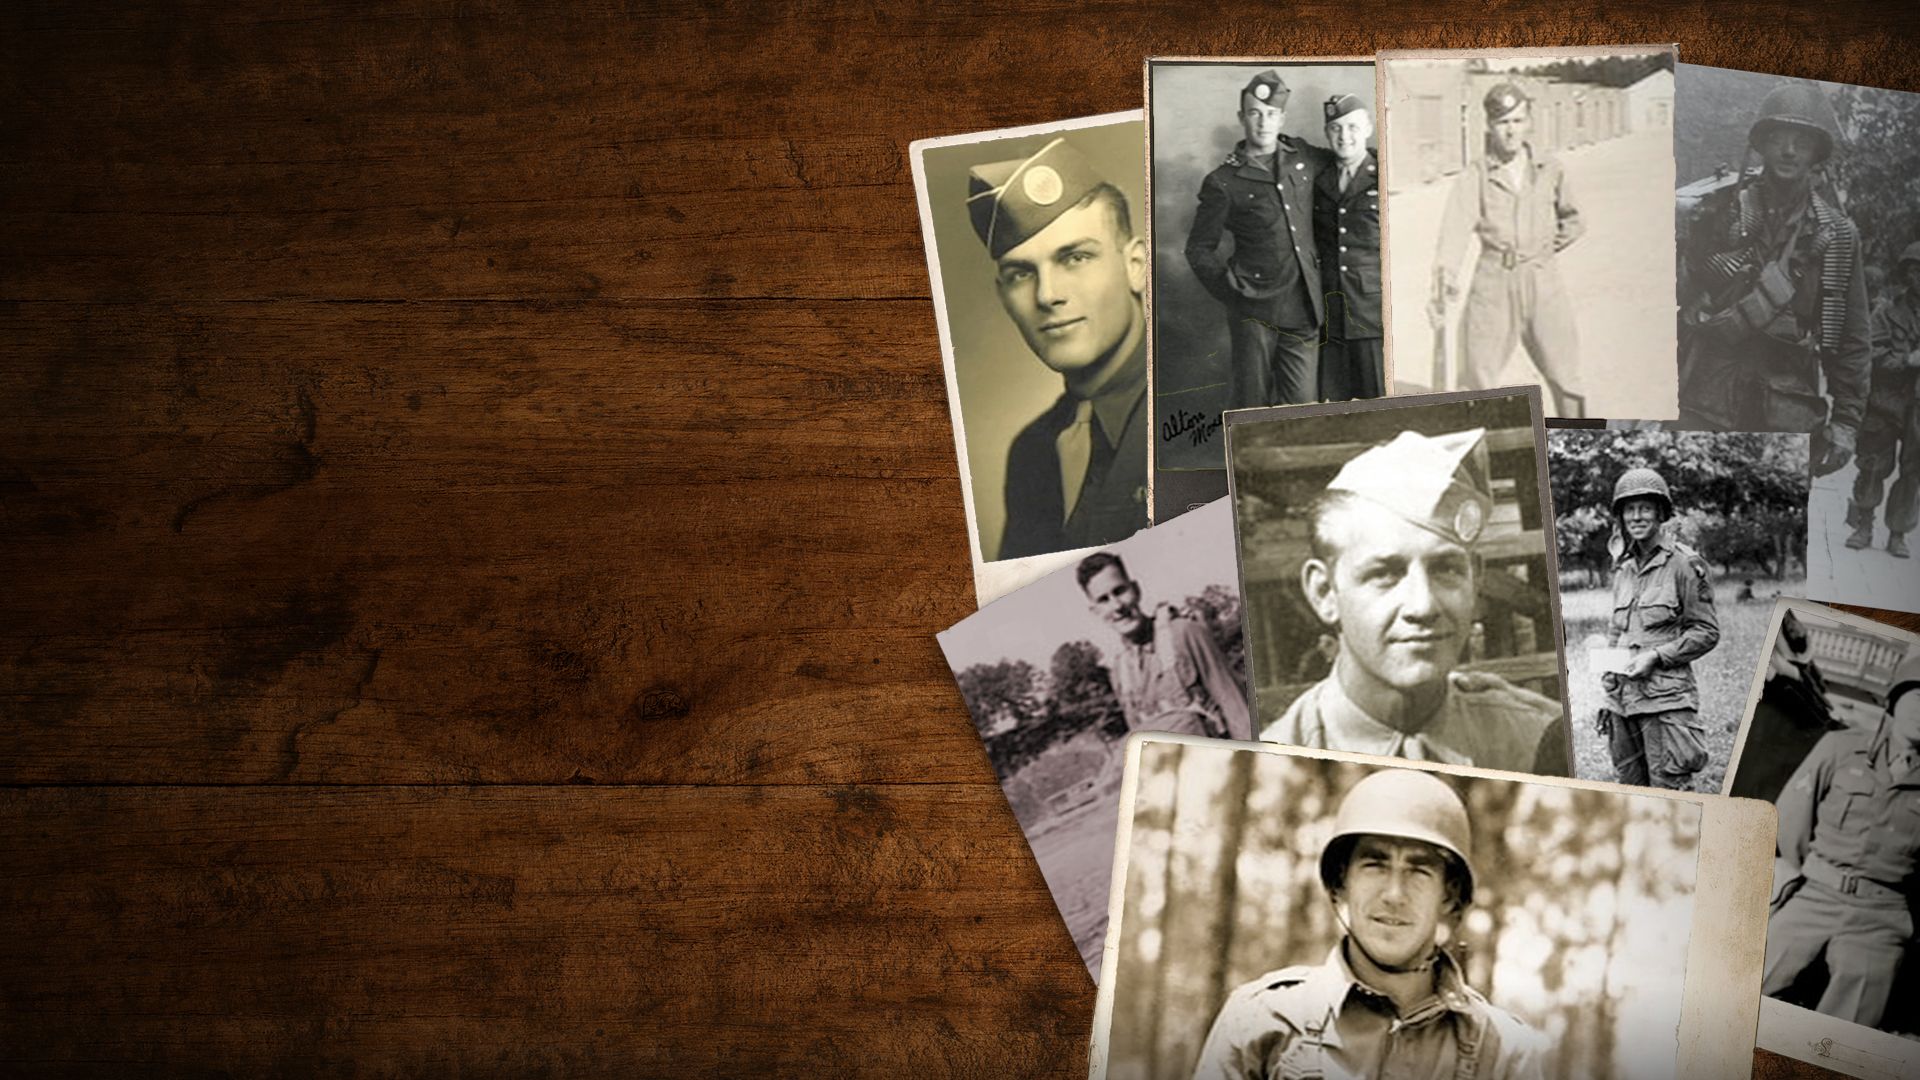 Easy Company: Heroes of WWII